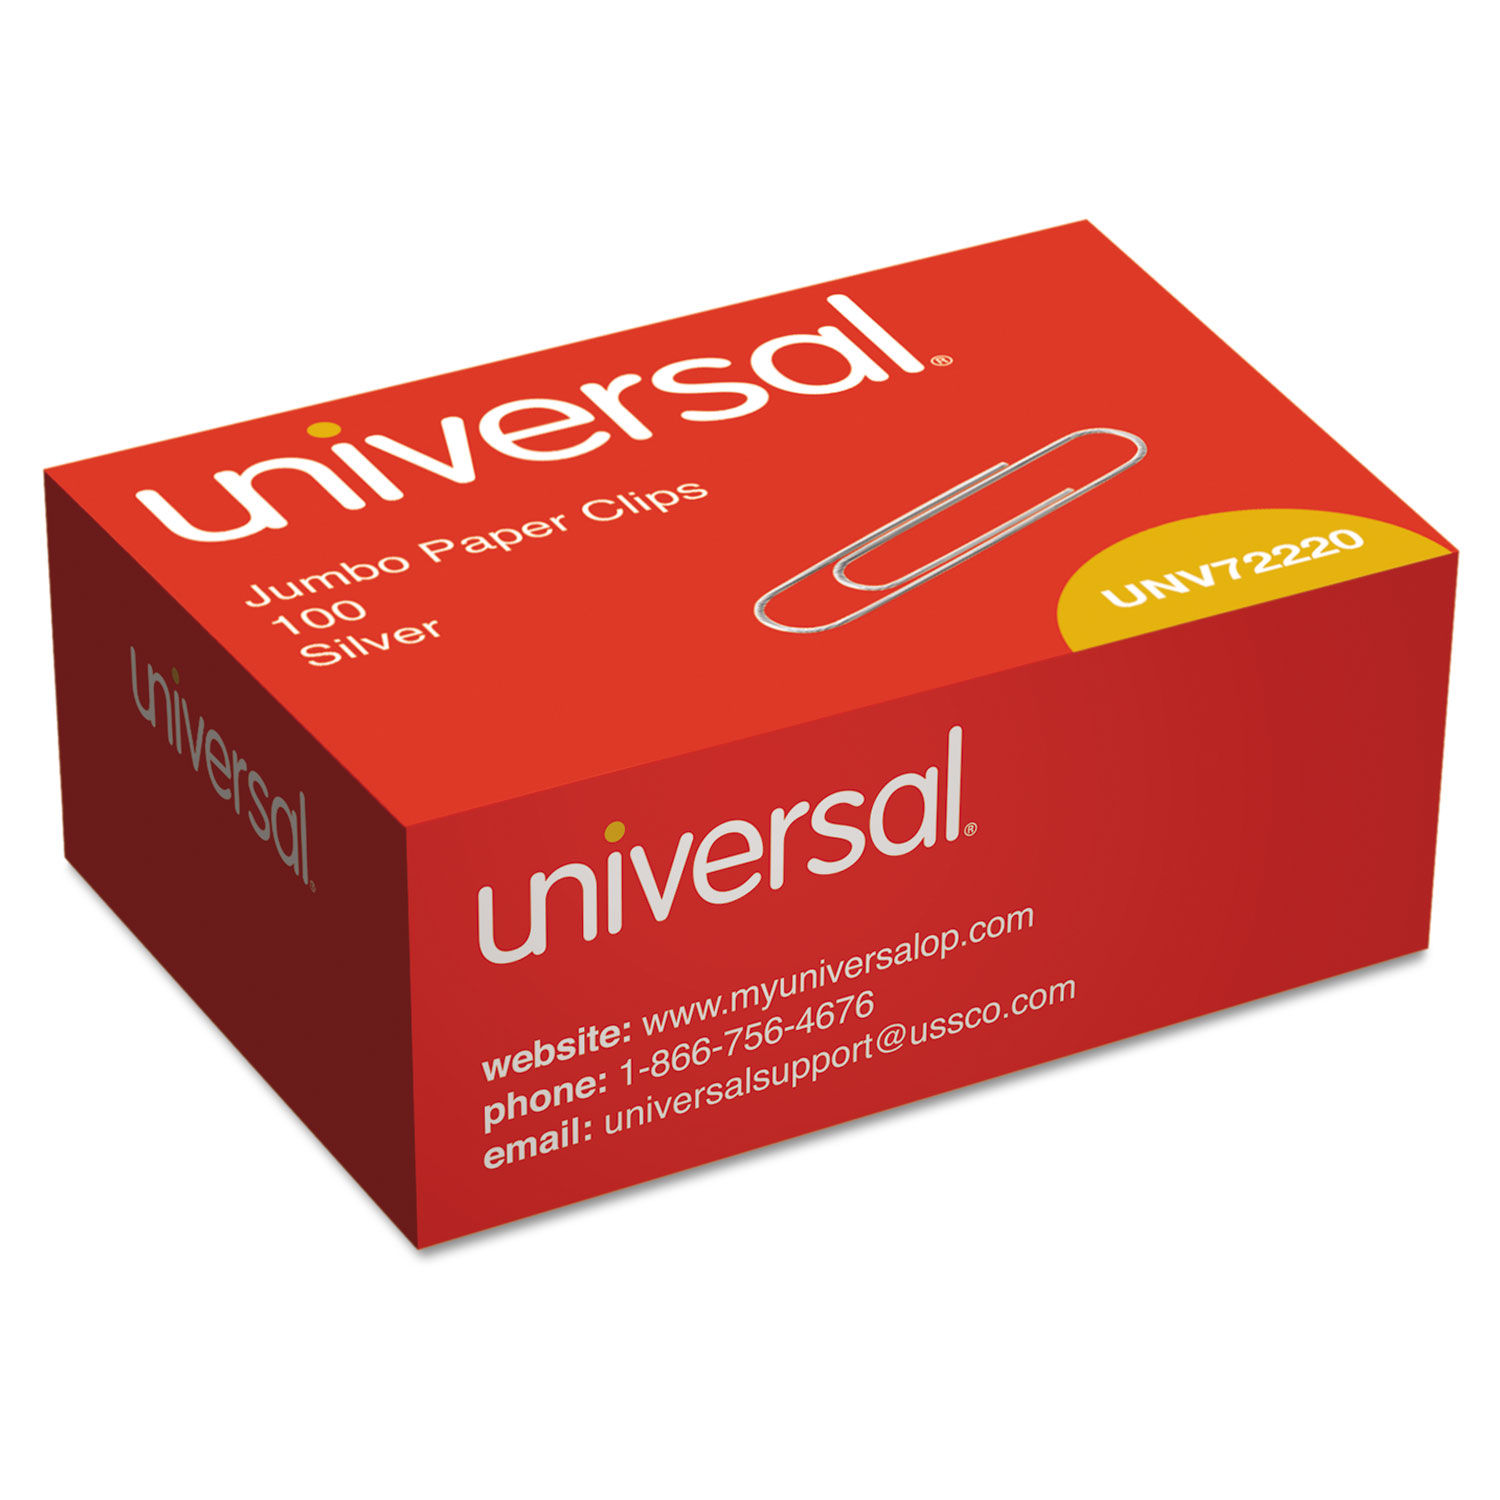 UNV72220 Jumbo Paper Clips by Universal